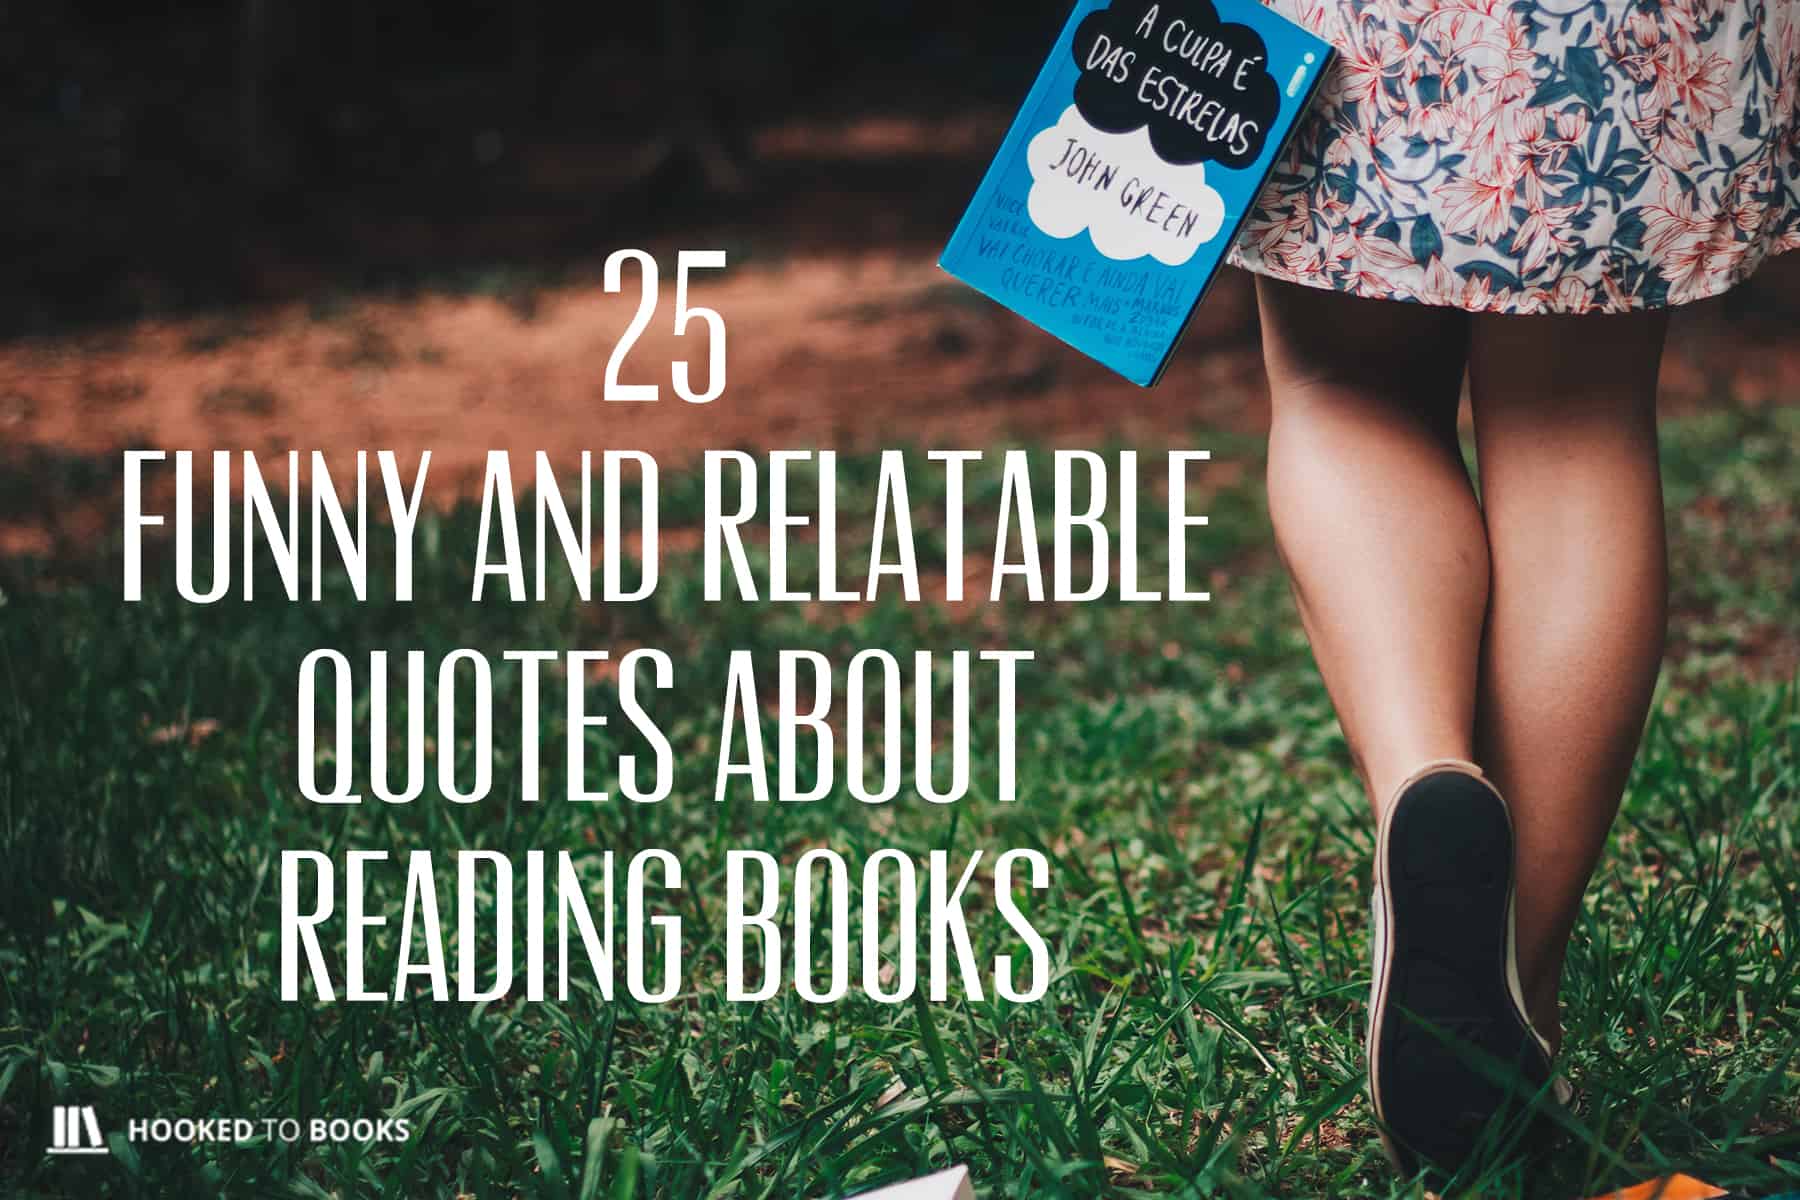 25 Funny and Relatable Quotes About Reading Books - Hooked To Books